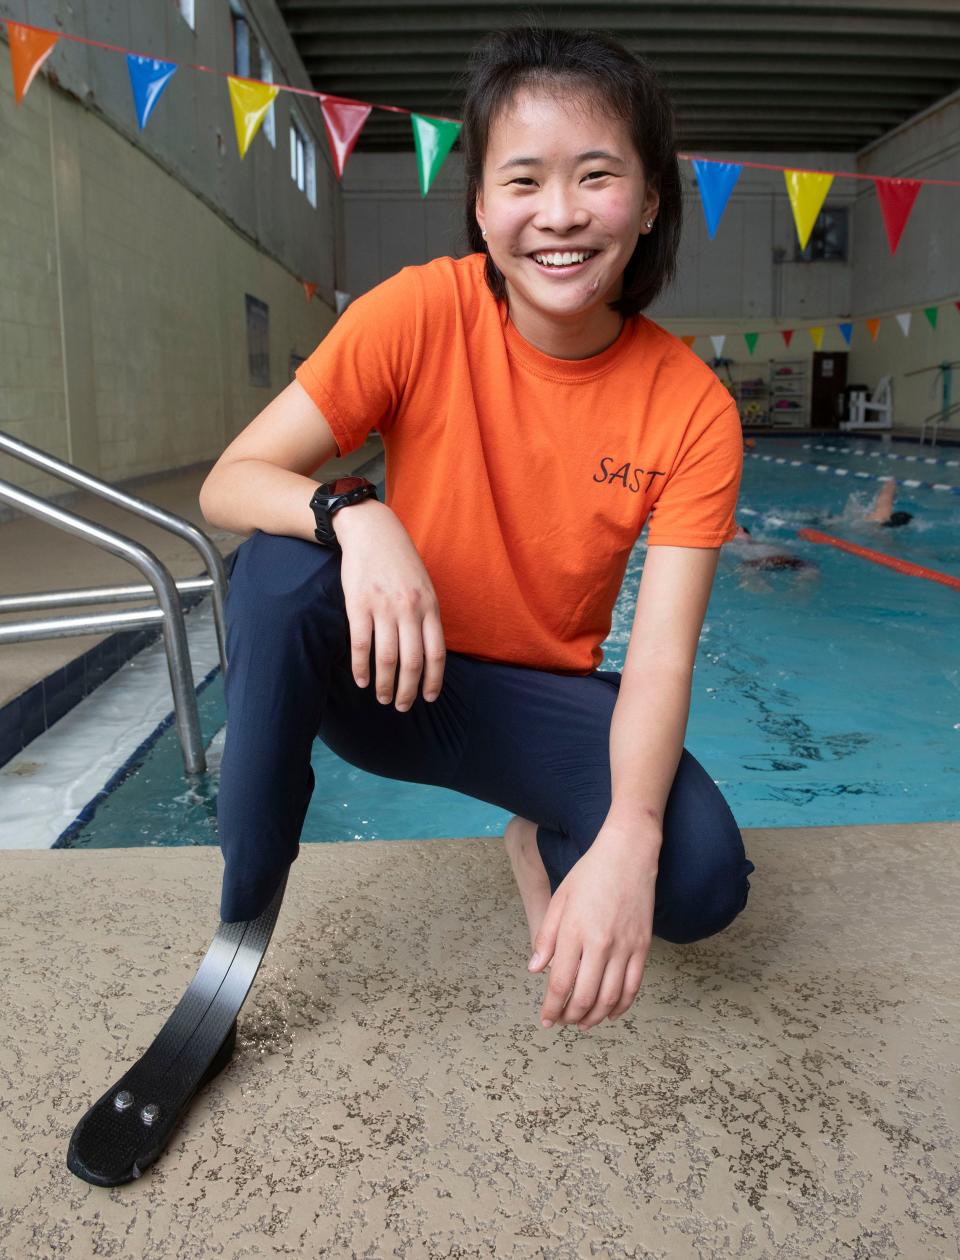 17-year-old Emma Meyers is a nationally-ranked triathlete. The Washington High School senior is working to compete in the Paris Paralympics 2024 this summer.